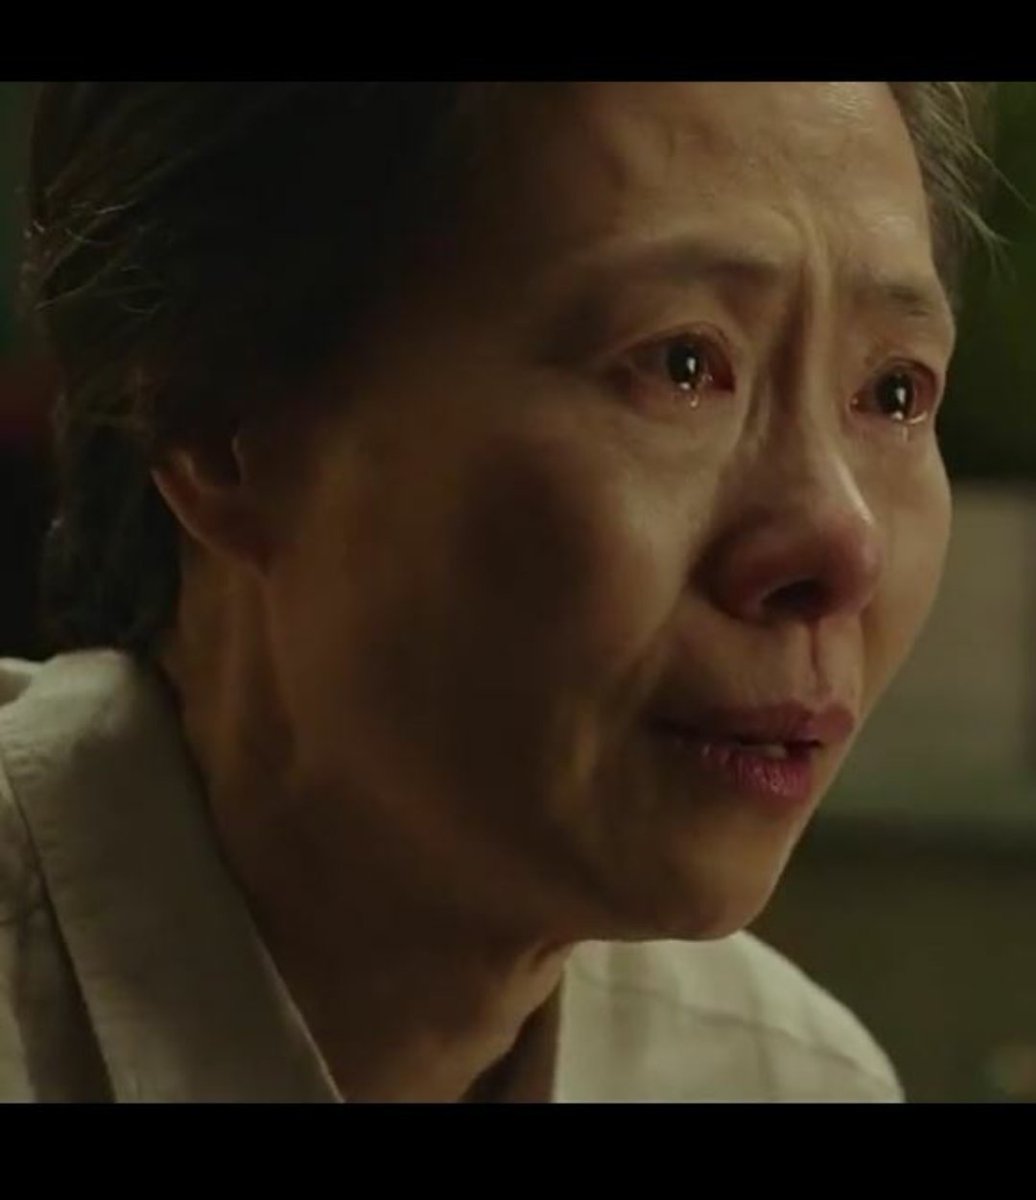 I knew she looked familiar! She was the actress who portrayed the mother in 'Along With The Gods'.

Can I just say I love love love her character in 'Search: WWW'. She's so good as that filthy rich woman who tries to control everything behind the scenes.
#YeSooJung #예수정